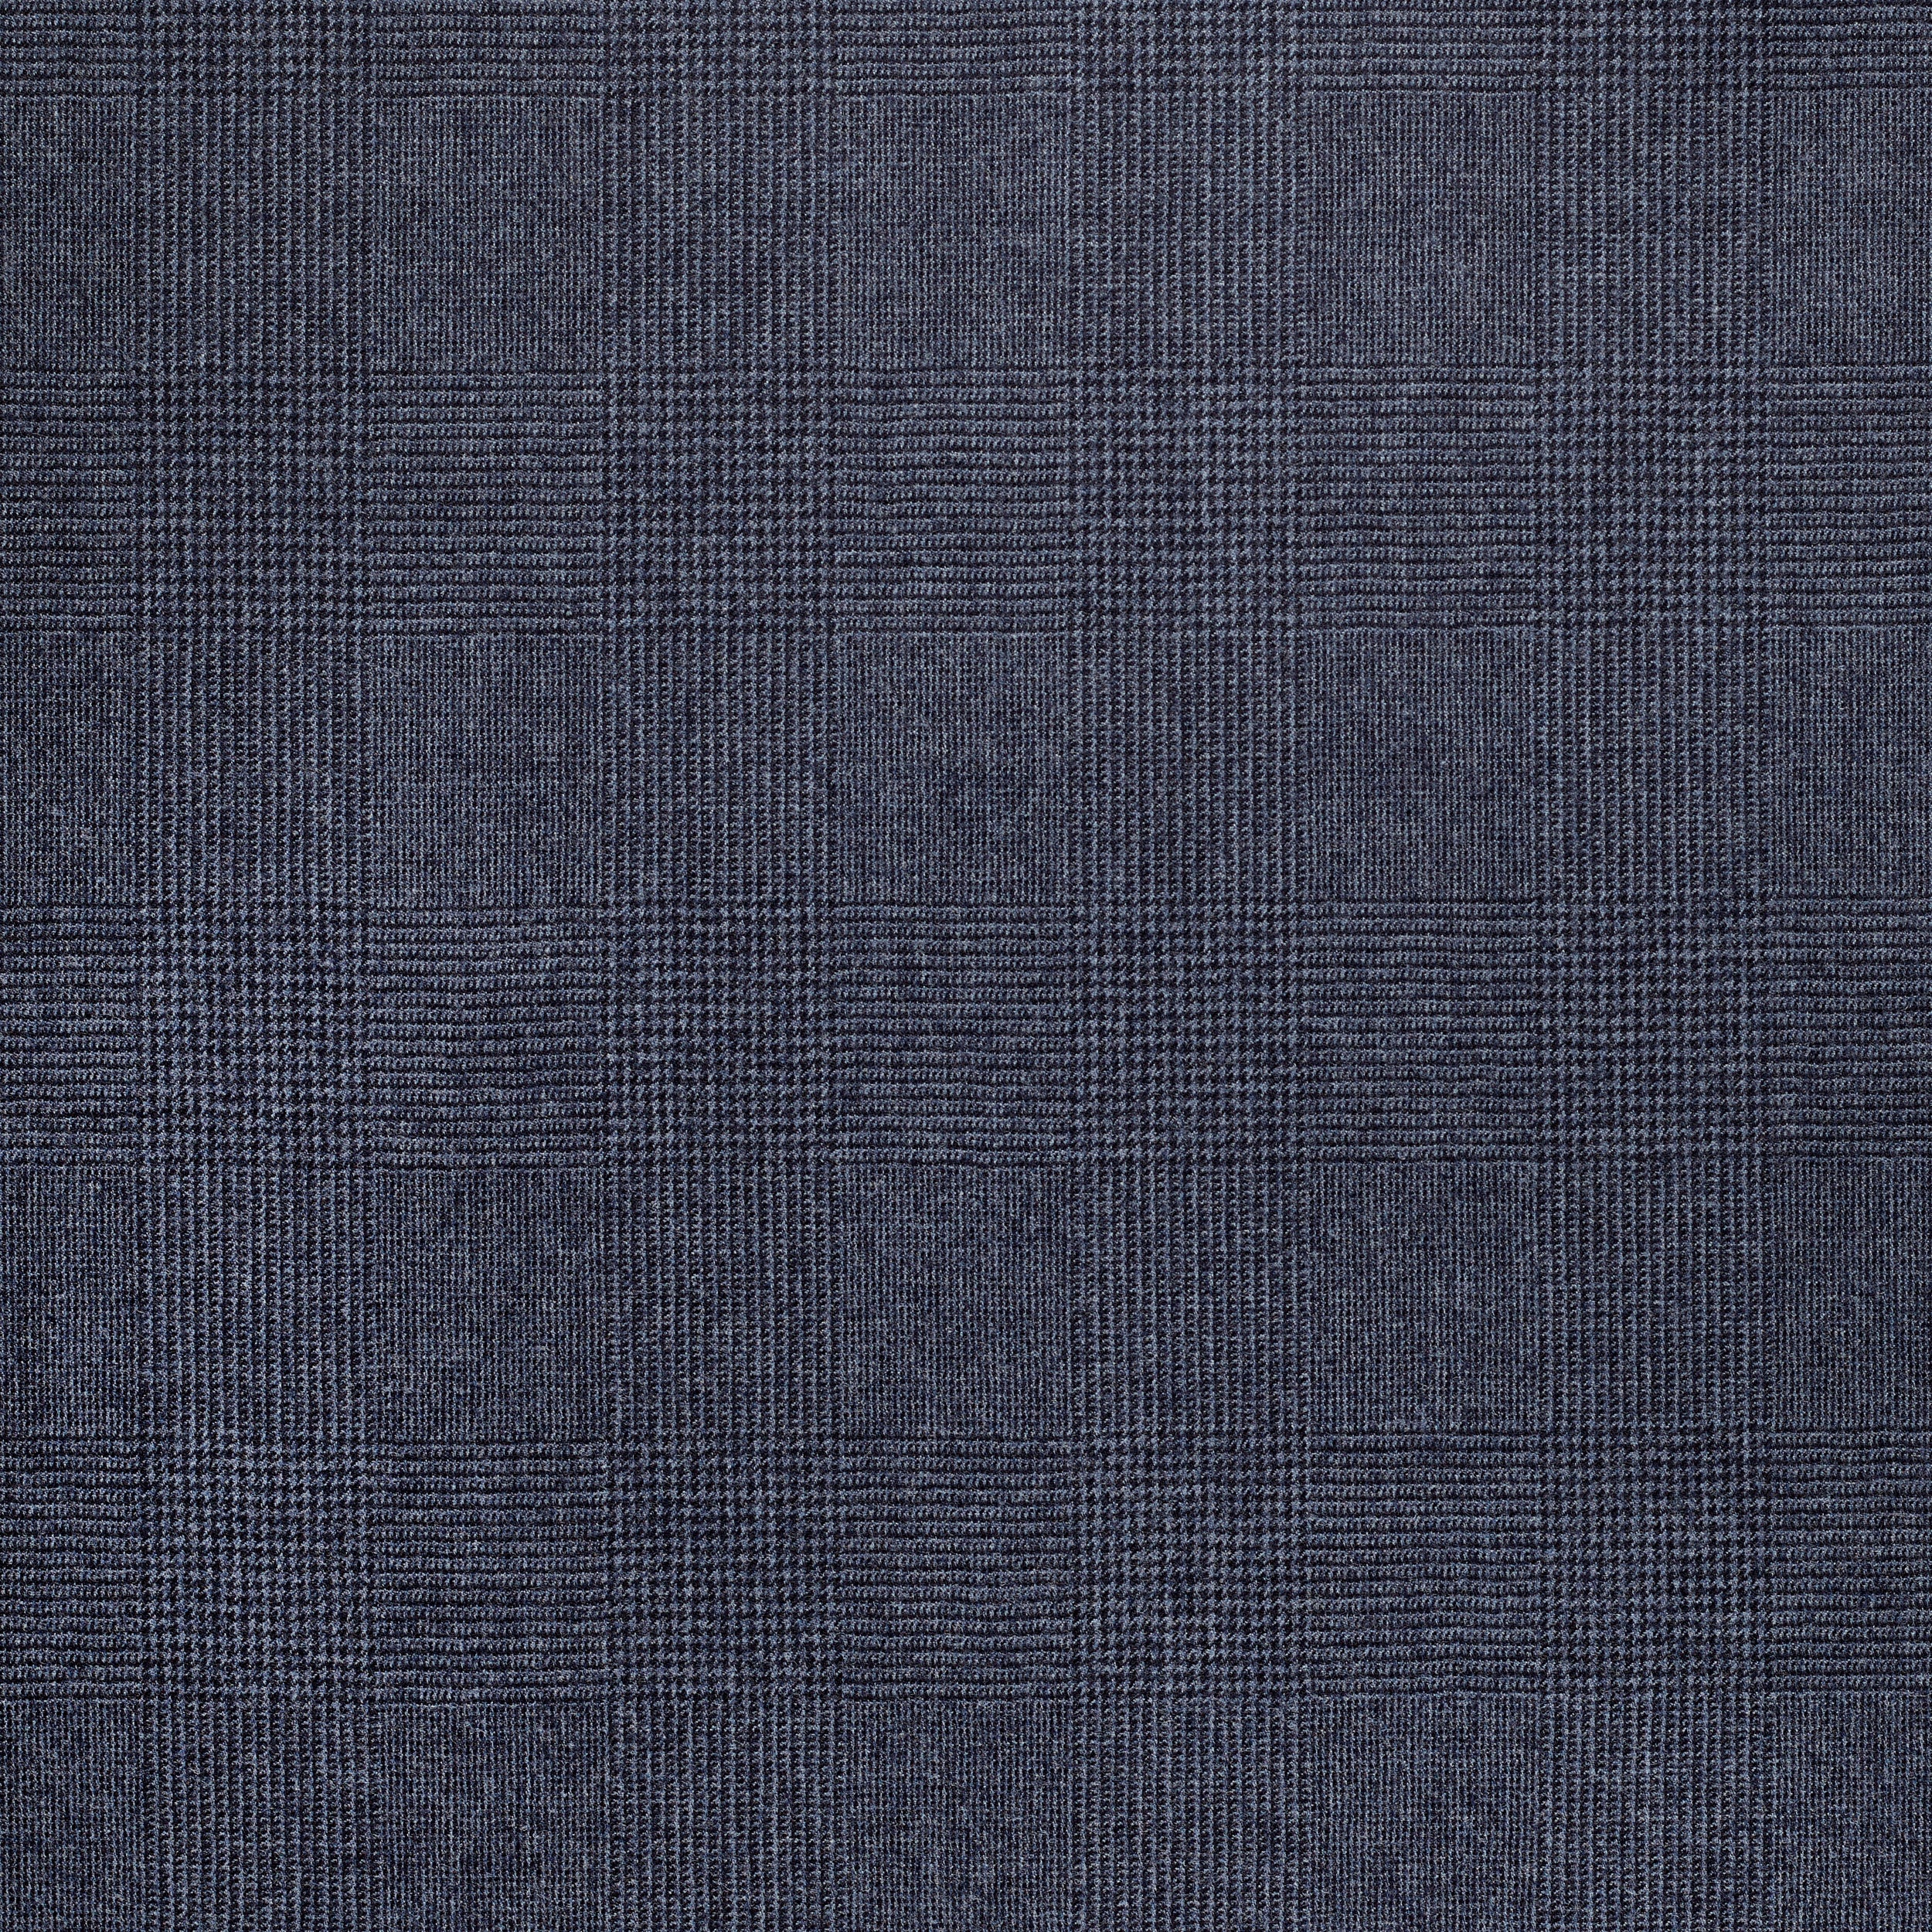 WF2-35 : Worsted Flannel Char-Navy Glen Check